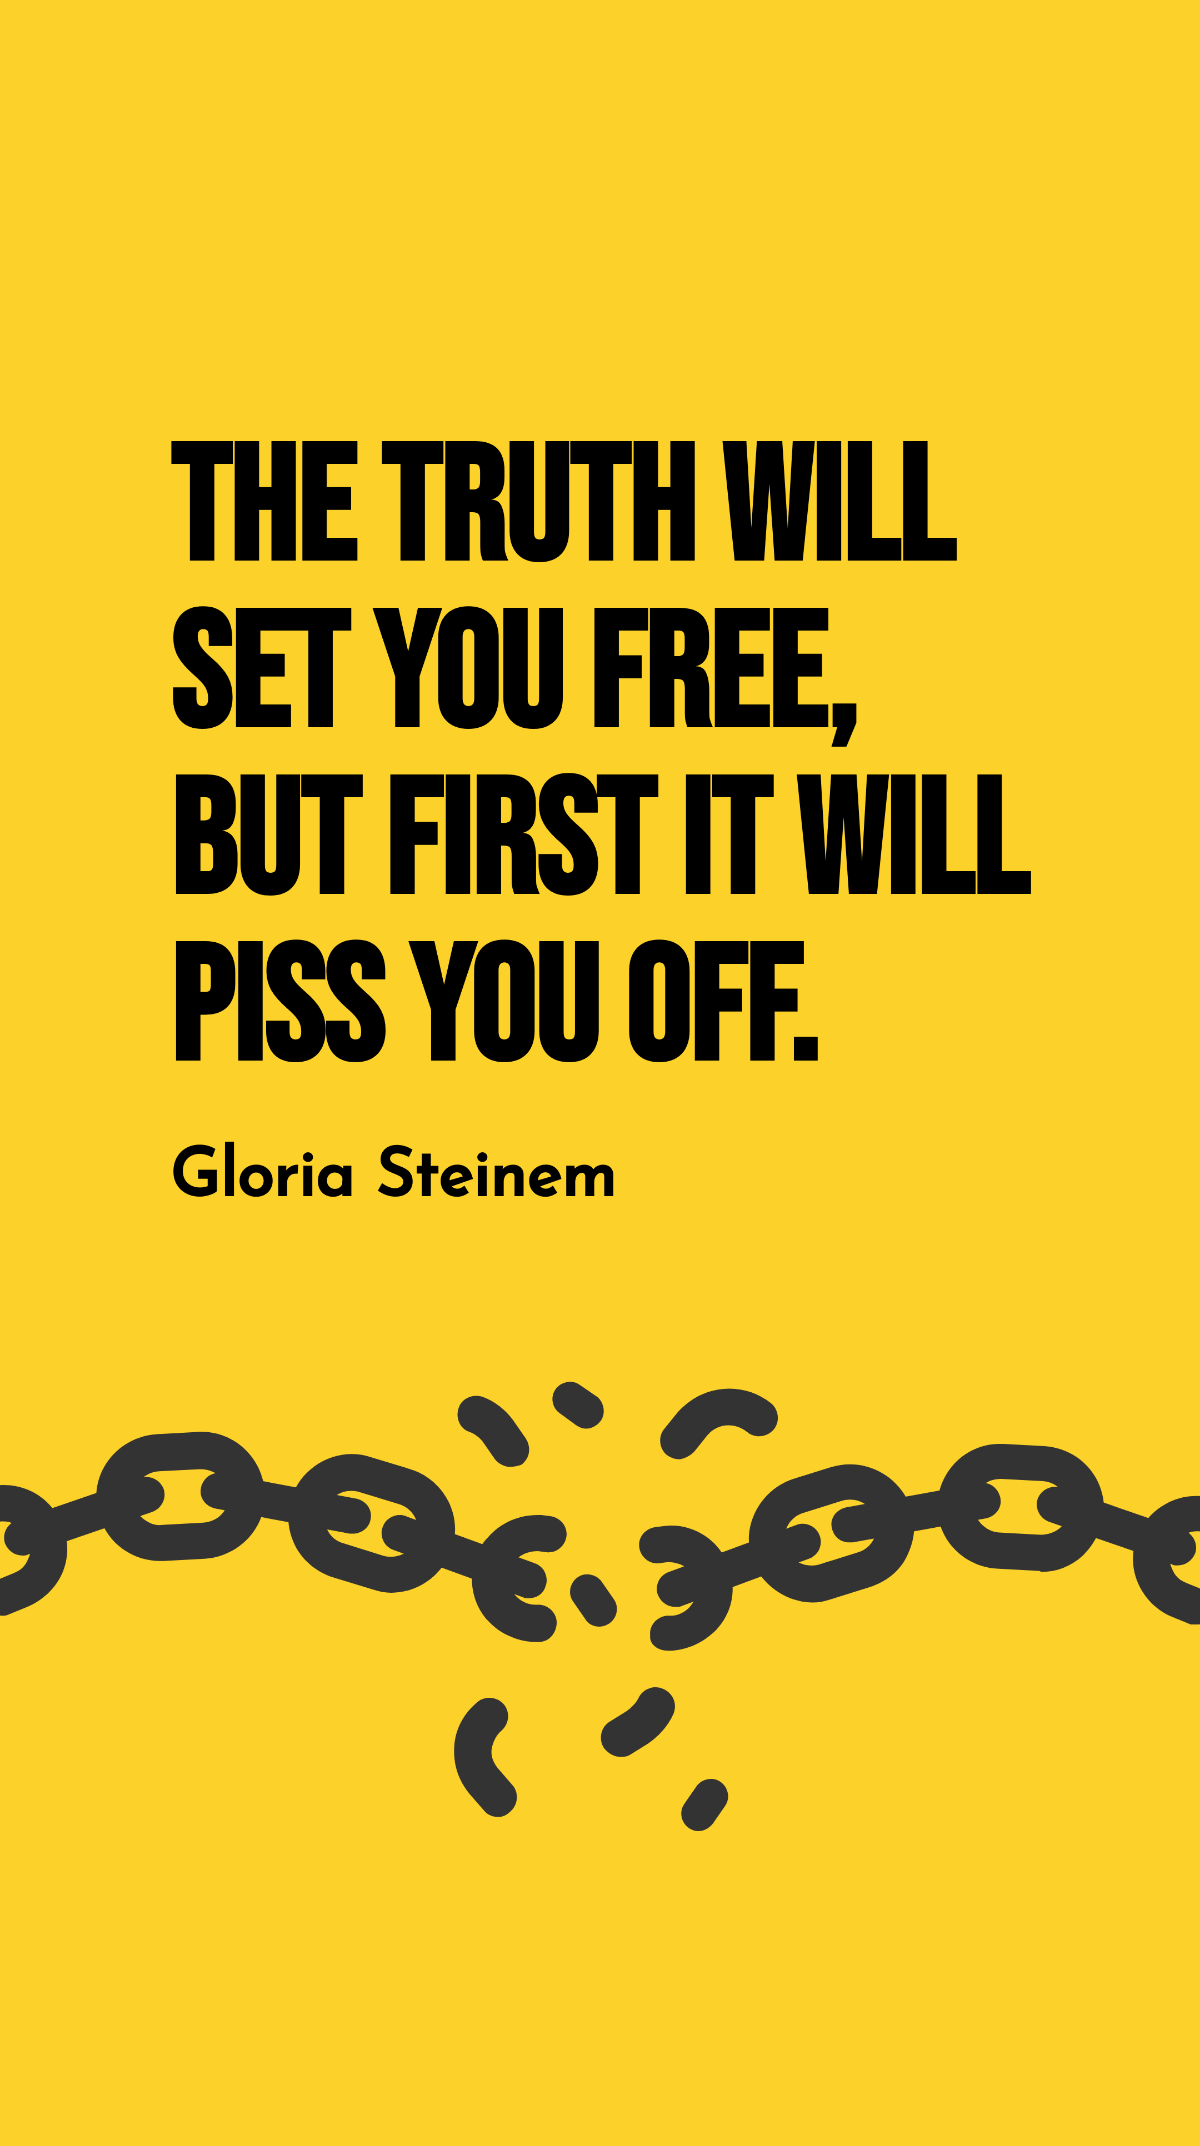 Gloria Steinem - The truth will set you free, but first it will piss you off. Template